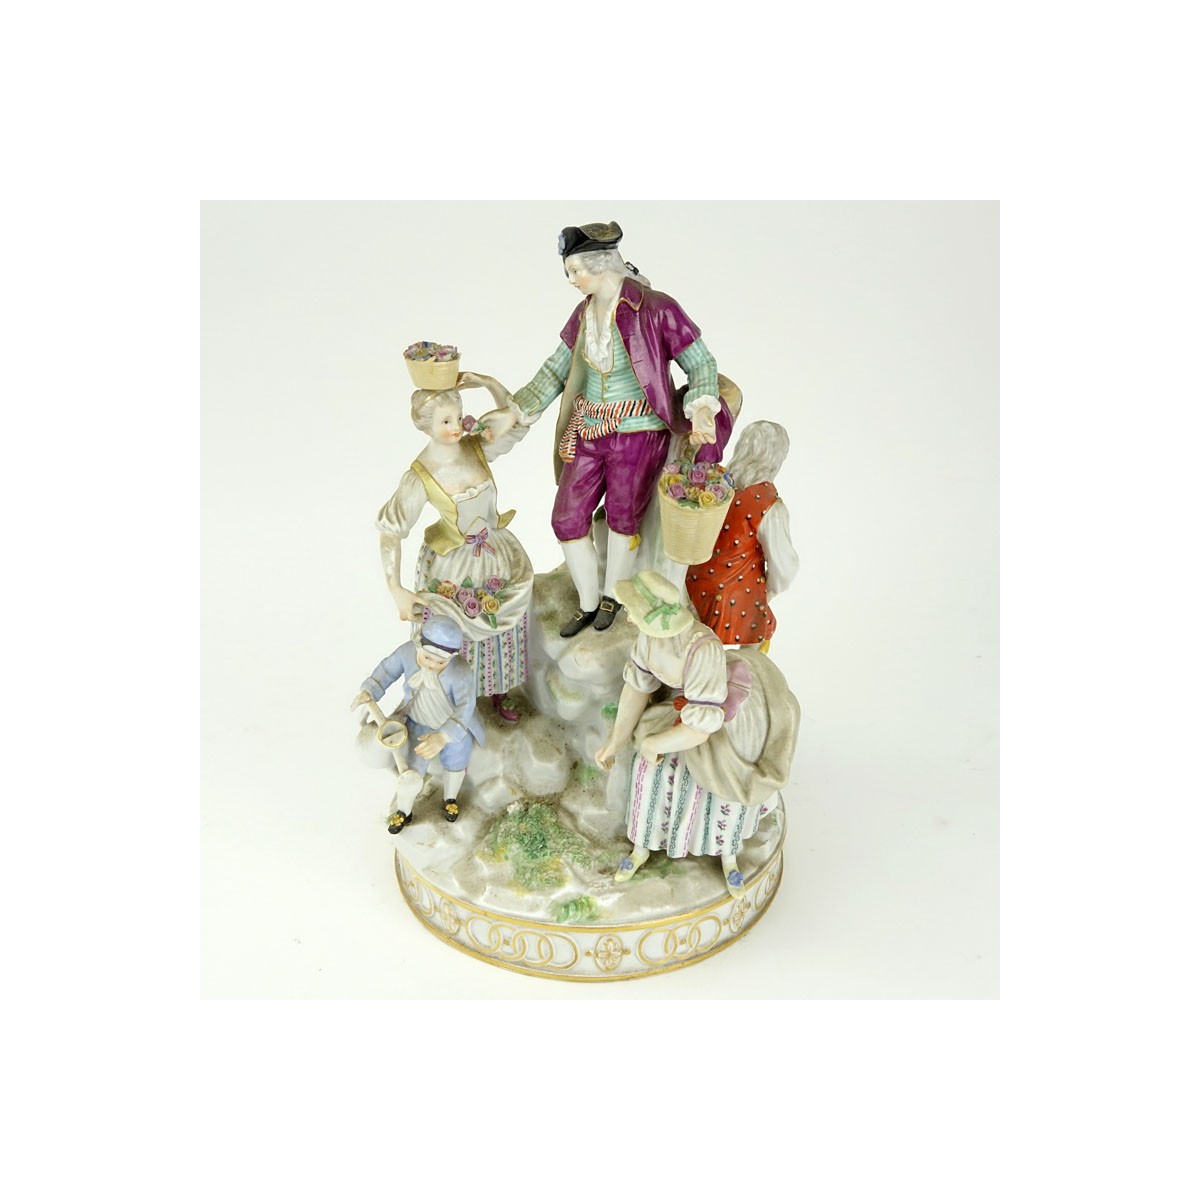 19th Century Meissen Hand Painted Porcelain Figural Group. Blue crossed sword mark to base.